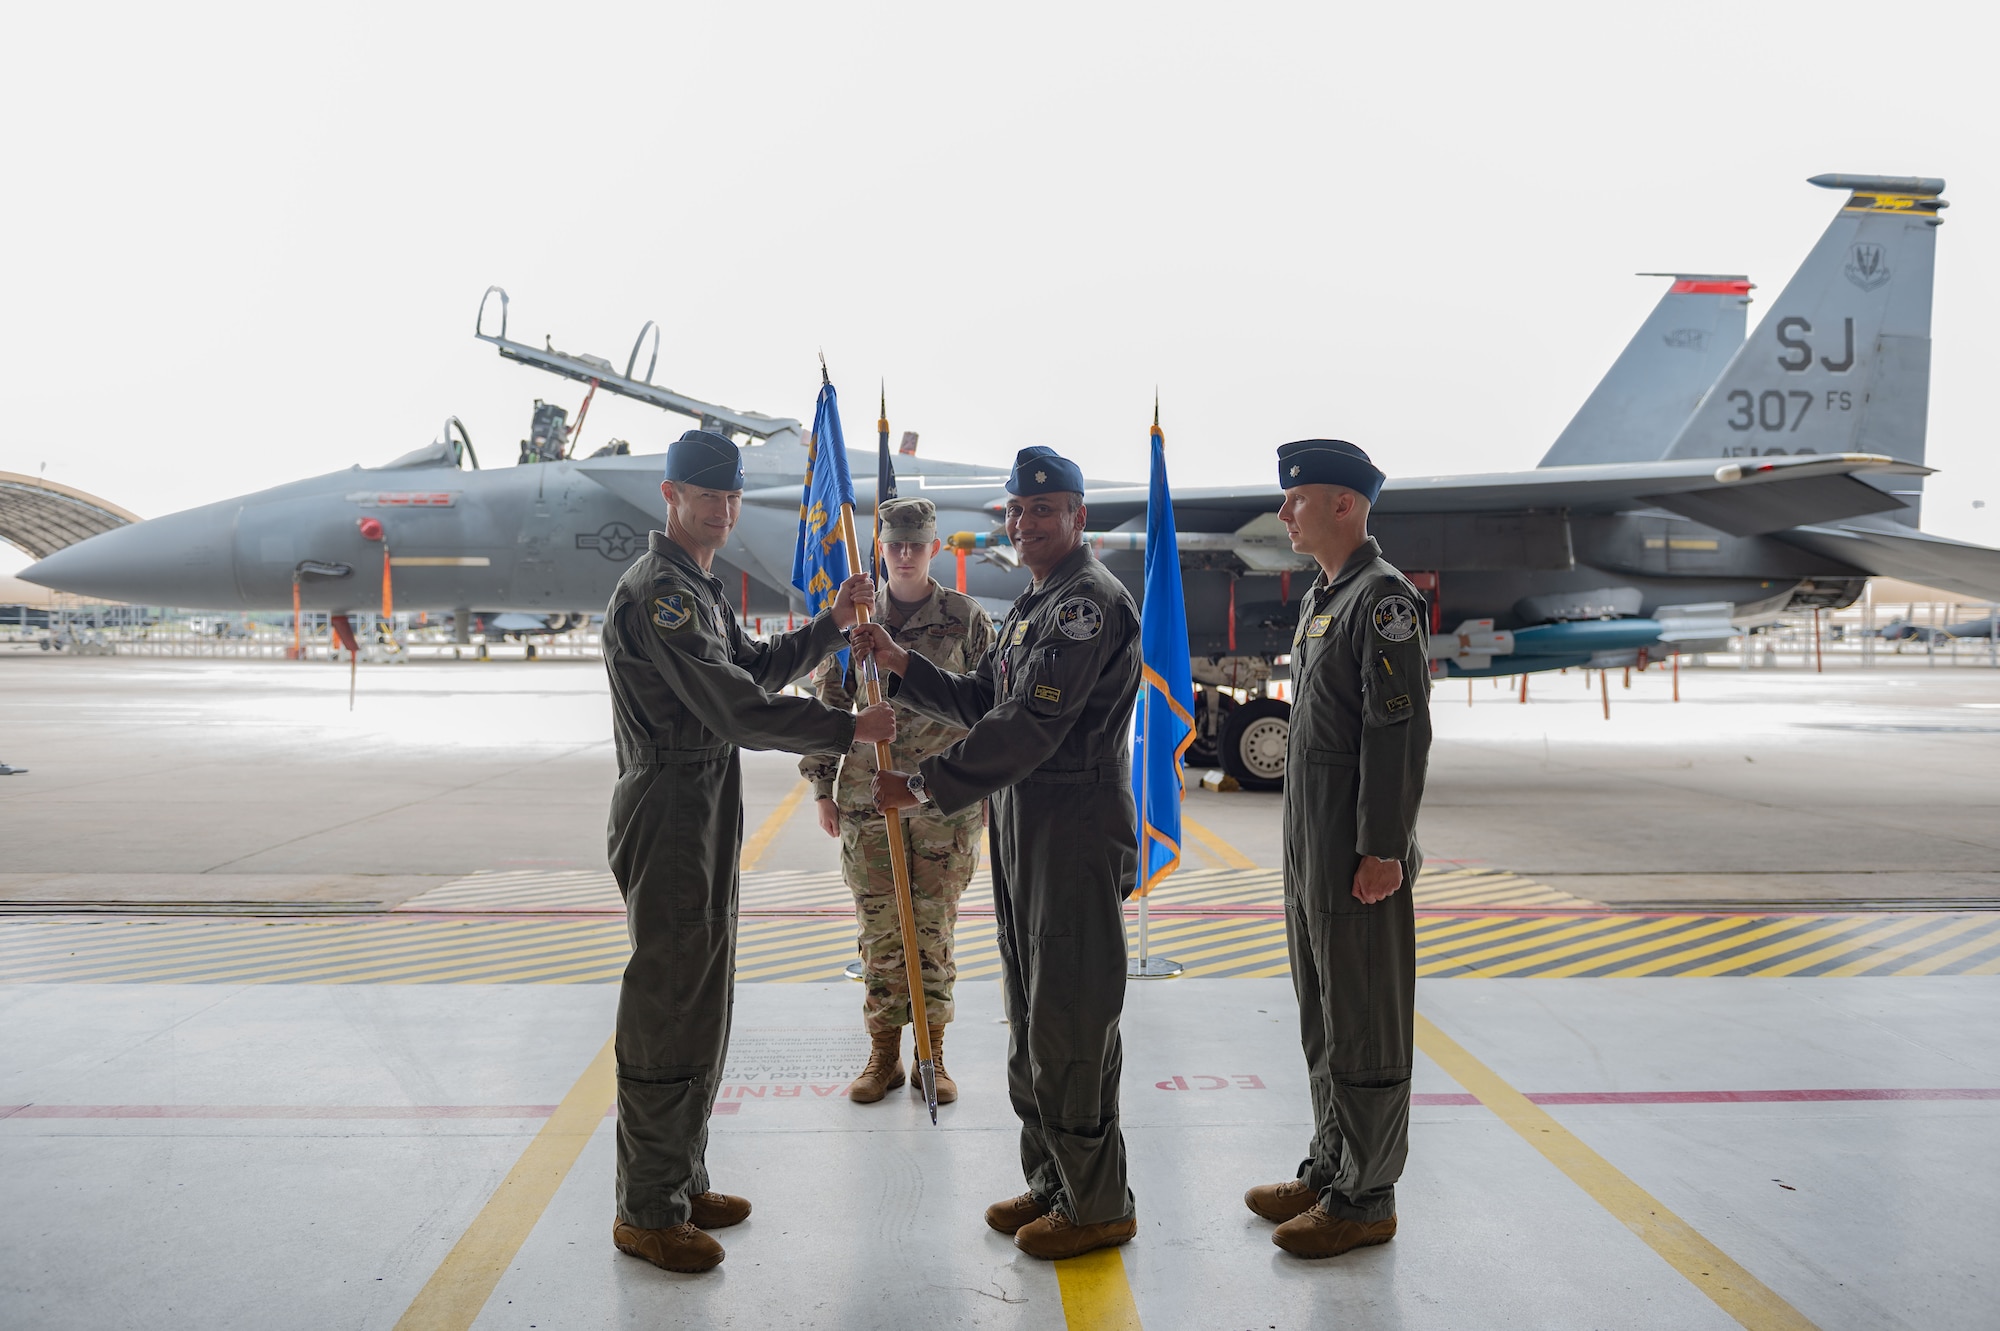 U.S. Air Force Lt. Col. Sriram Krishnam, 307th Fighter Squadron commander, passes the squadron guidon to Col. Chad Shenk, 414th Fighter Squadron commander, during a change of command ceremony at Seymour Johnson Air Force Base, North Carolina, June 2, 2023. Base and community leadership, along with friends and family of the squadron’s incoming and outgoing commanders, gathered to witness the traditional passing of the guidon. (U.S. Air Force photo by Airman 1st Class Rebecca Sirimarco-Lang)